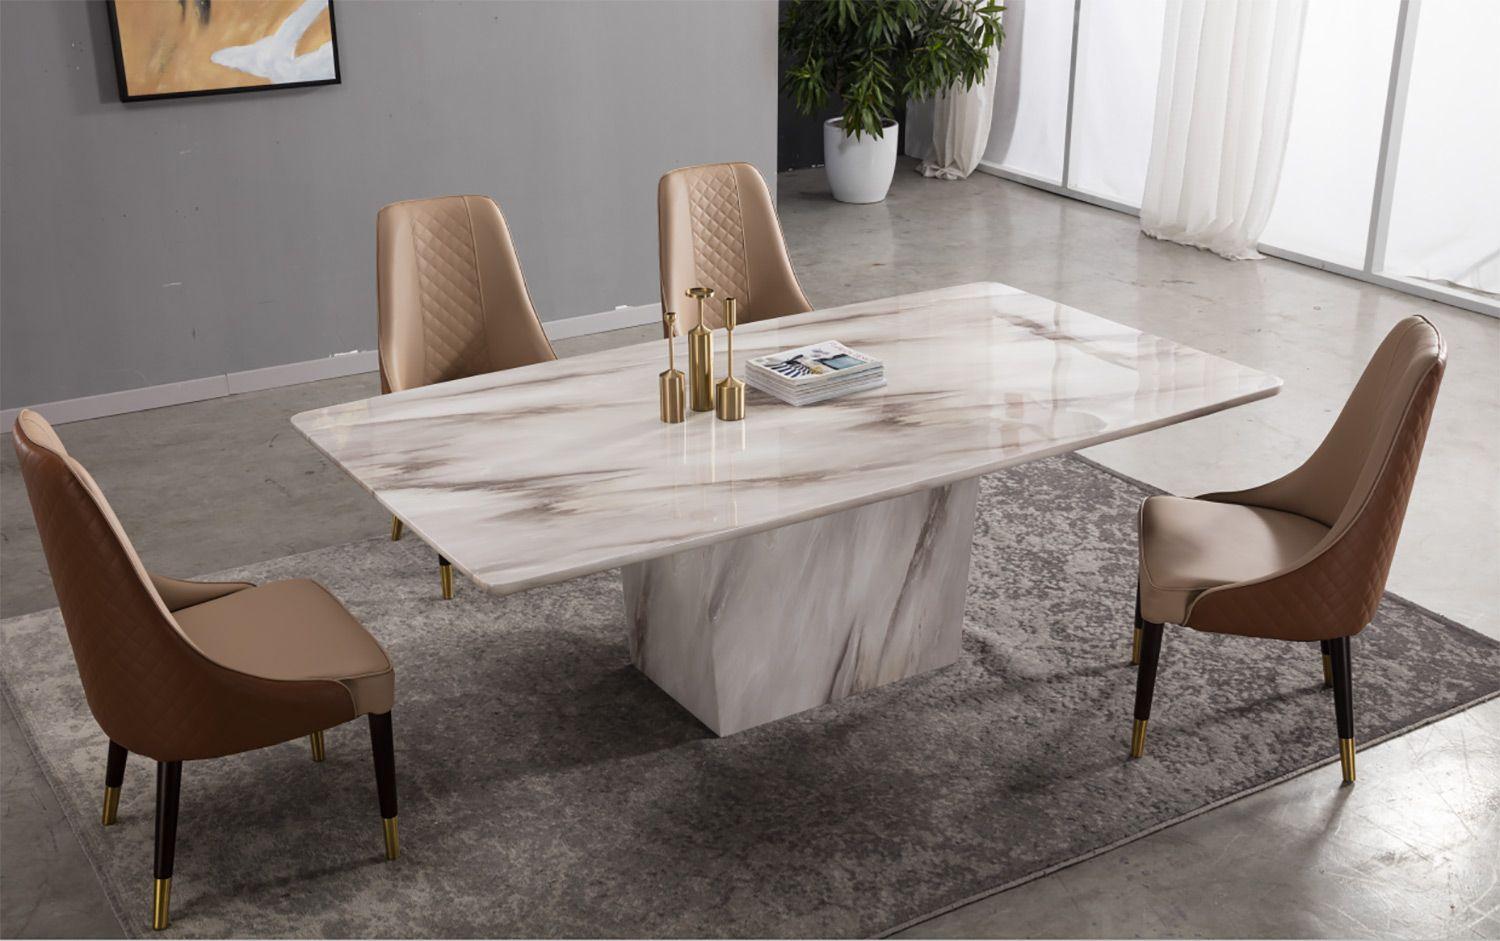 Modern Dining Table DT-H309 / CK-H013-BR.TAN DT-H309-7PC in Natural, Tan Faux Leather